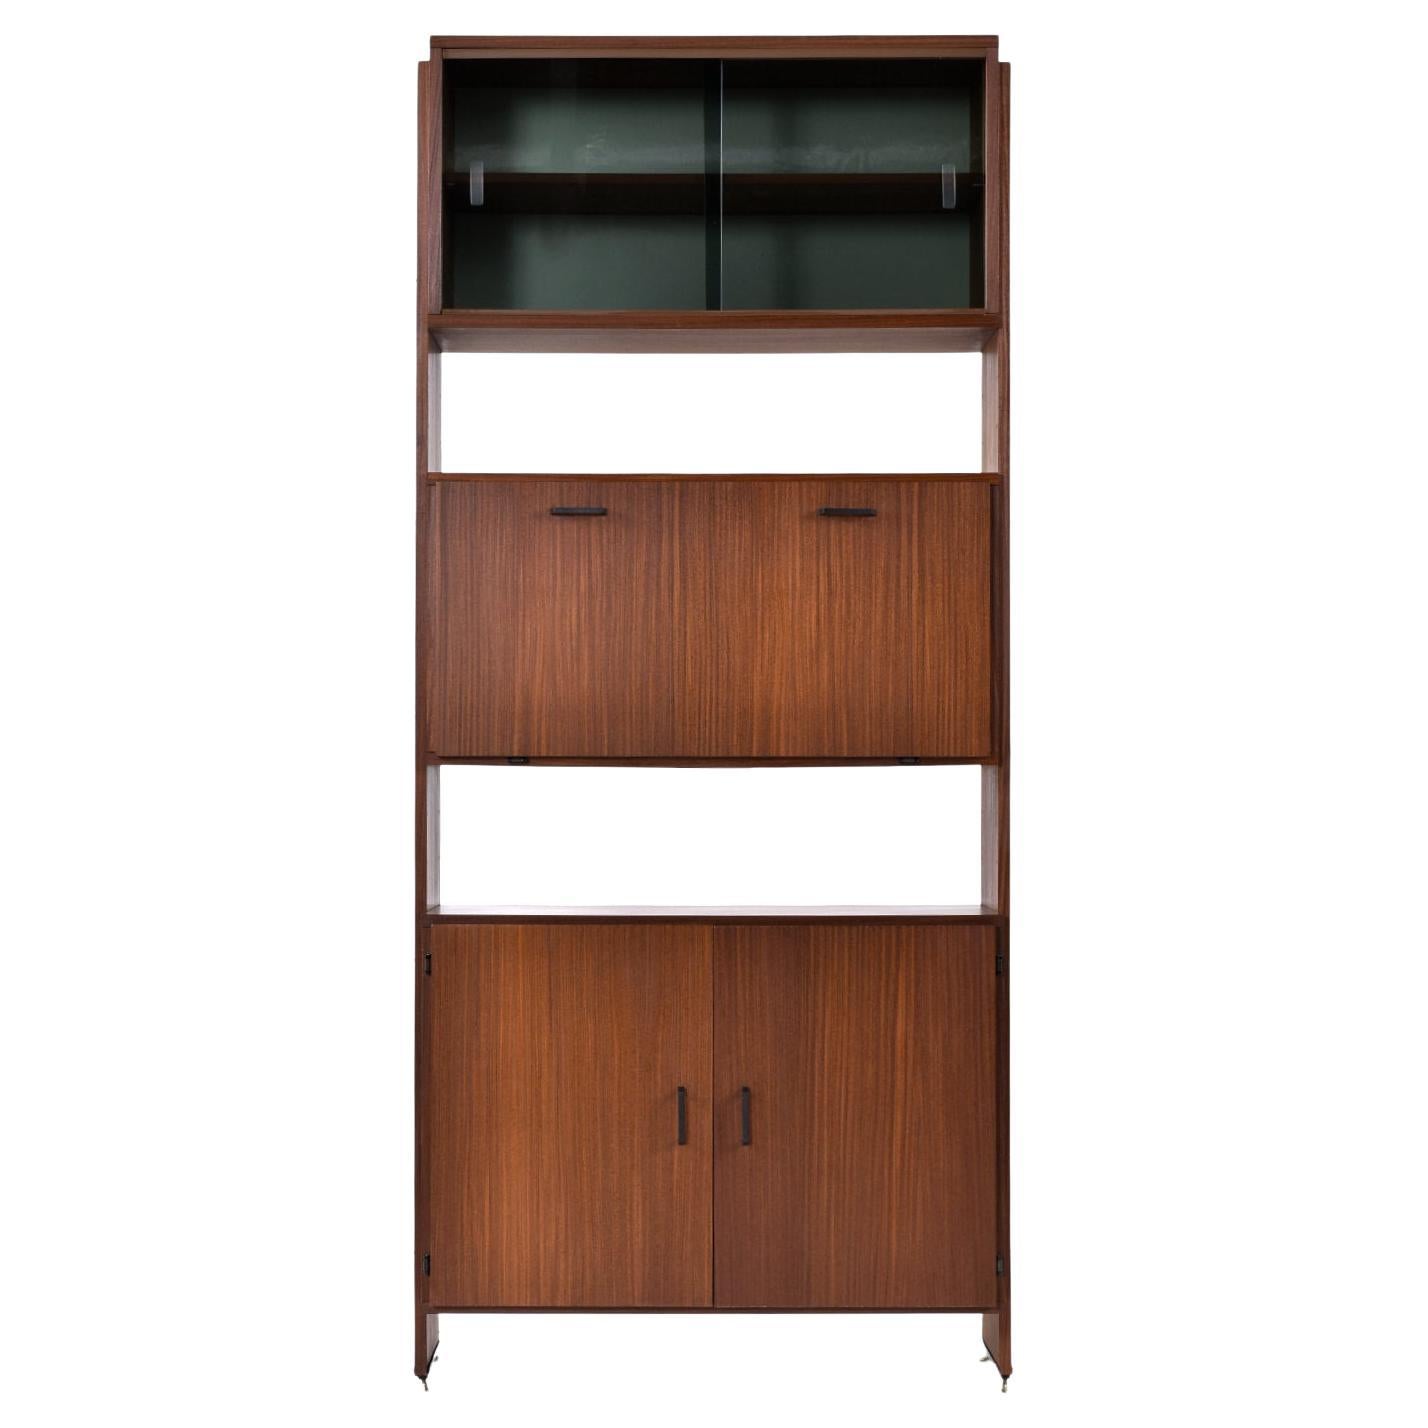 Versatile Mid-Century Modern bookcase hutch with many storage options. This piece packs a lot of versatility. The open shelving makes it useful as a bookcase. The drop down door cabinet can be used as a secretary writing desk or bar. Keep glassware